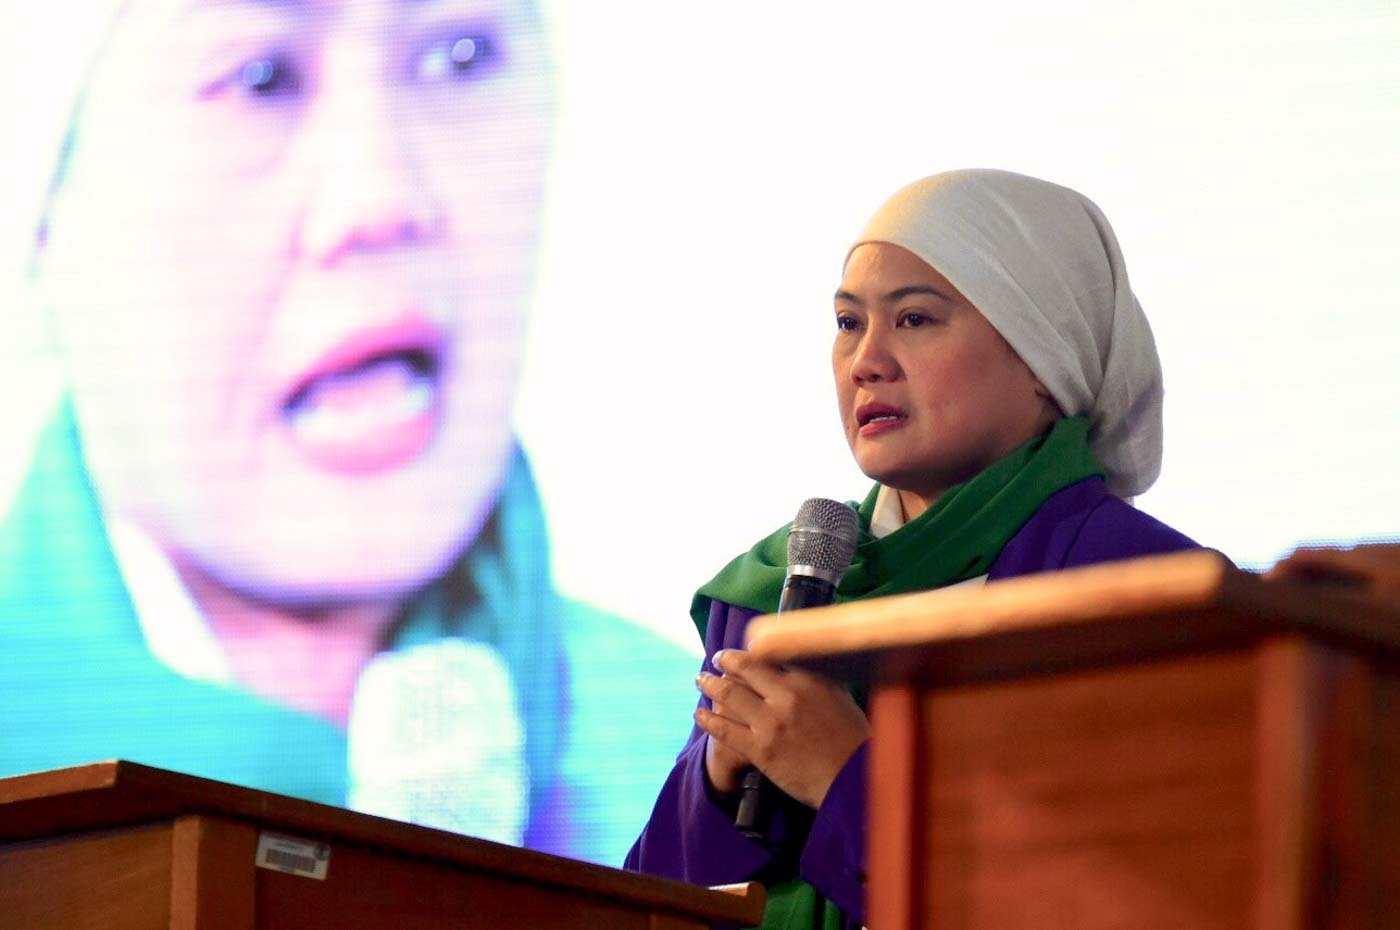 NEW CHALLENGE. Mindanaoan civic leader Samira Gutoc wants the youth to be part of the governance of the new Bangsamoro Autonomous Region in Muslim Mindanao. Photo by Leanne Jazul 